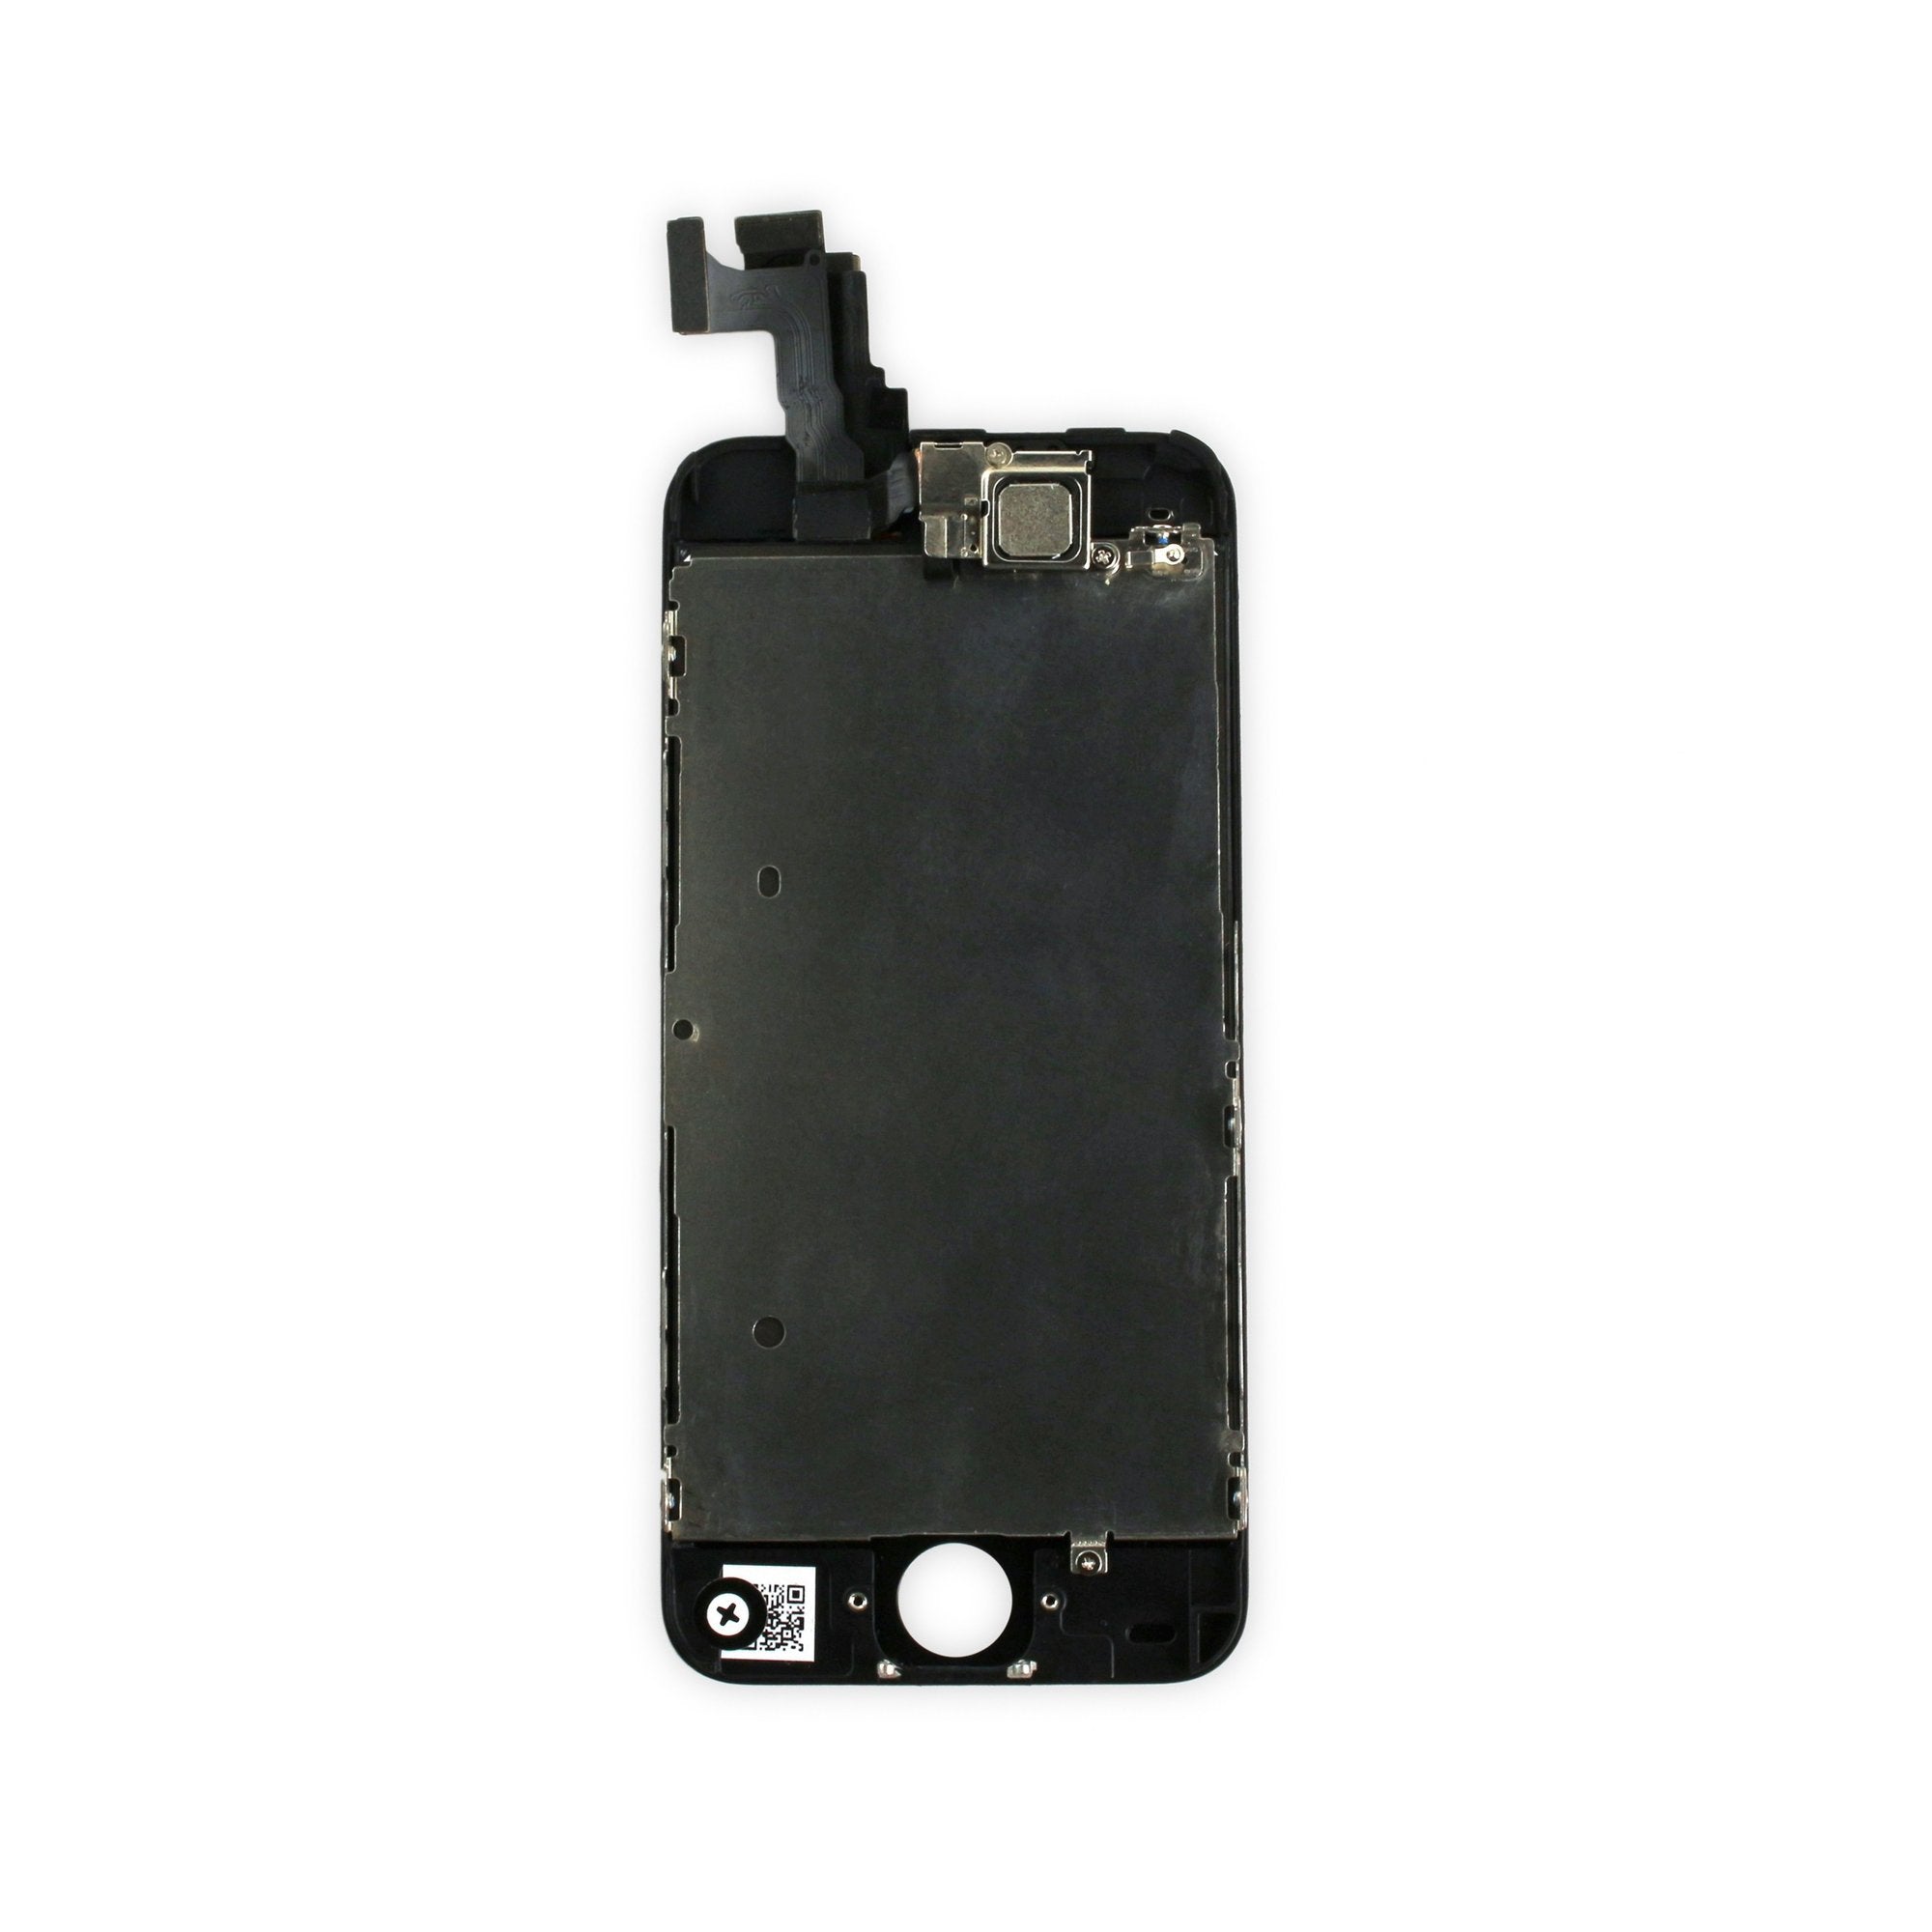 iPhone 5c Screen New Part Only